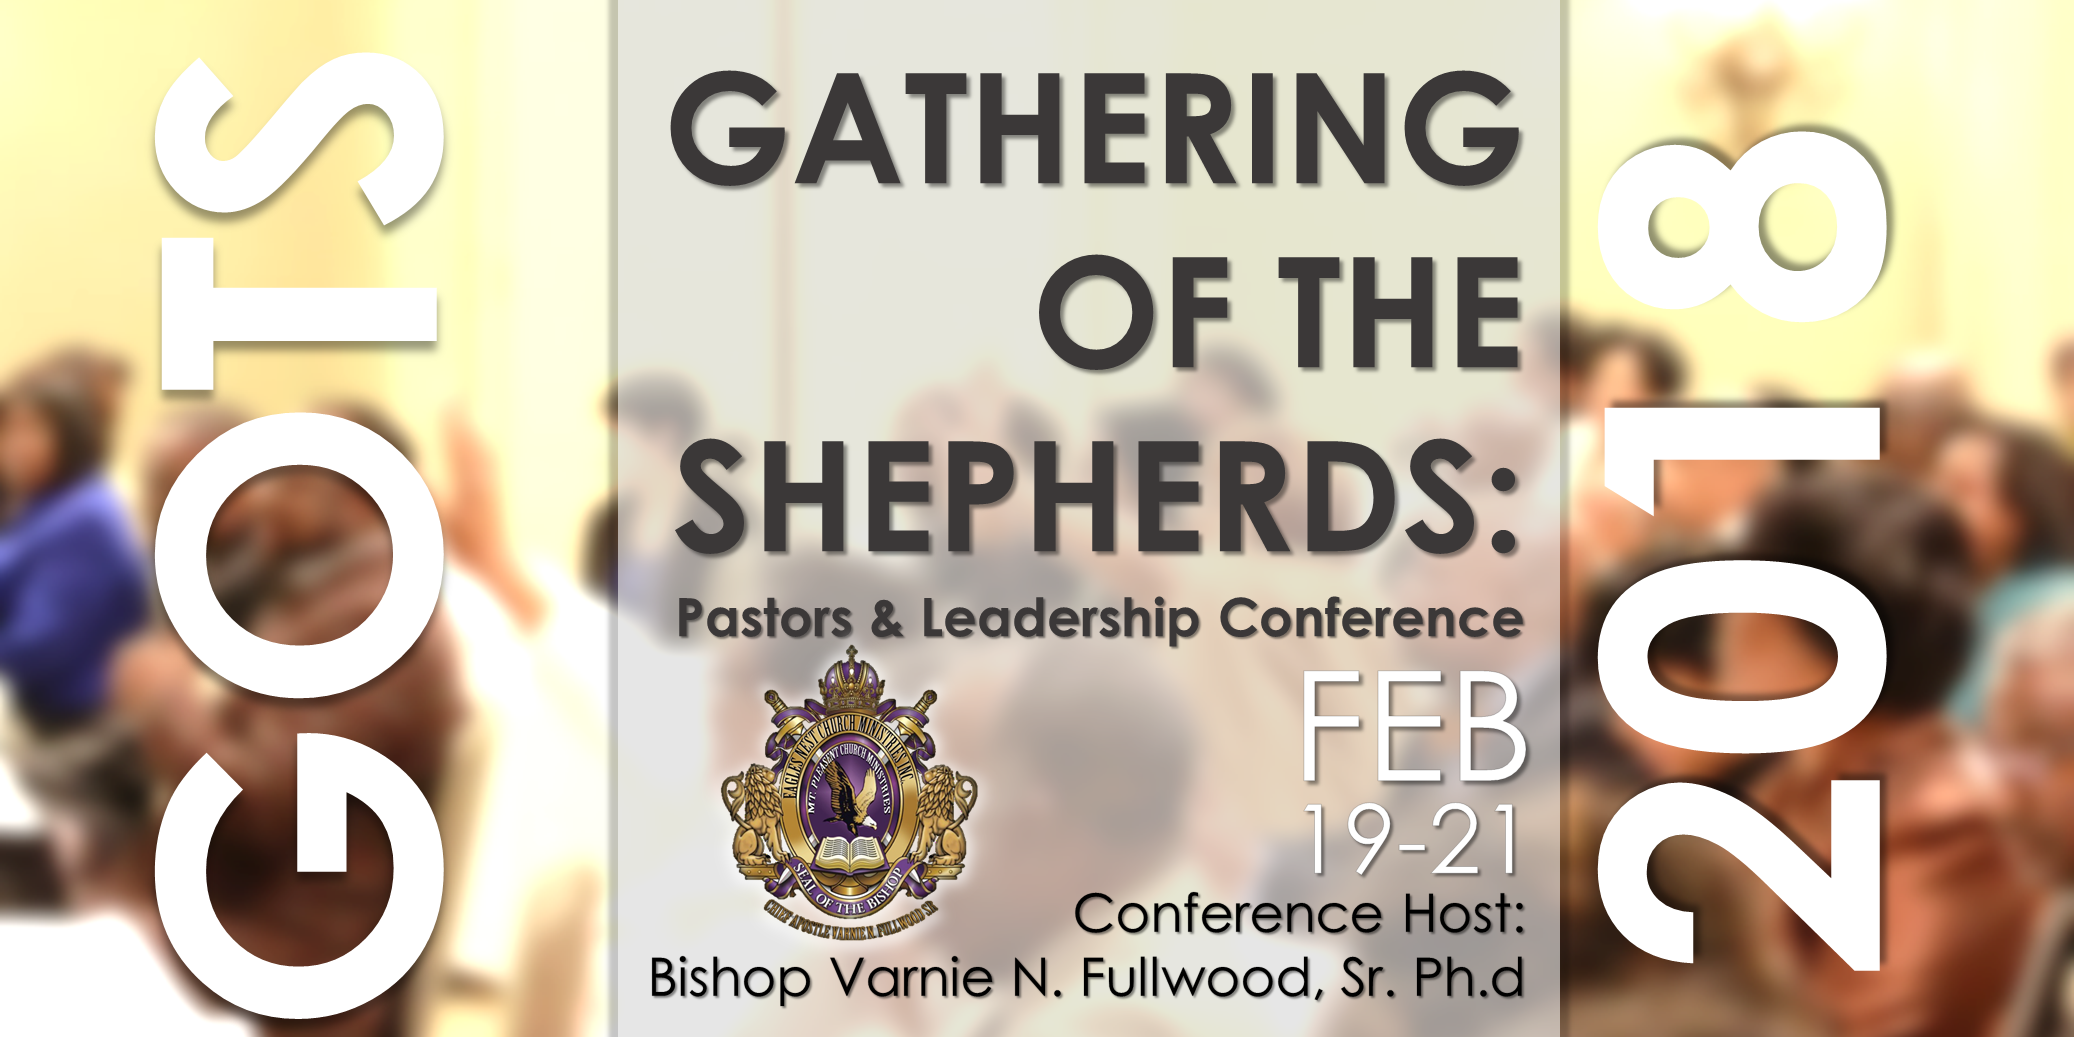 Gathering of the Shepherds: Pastors and Leadership Conference 2018